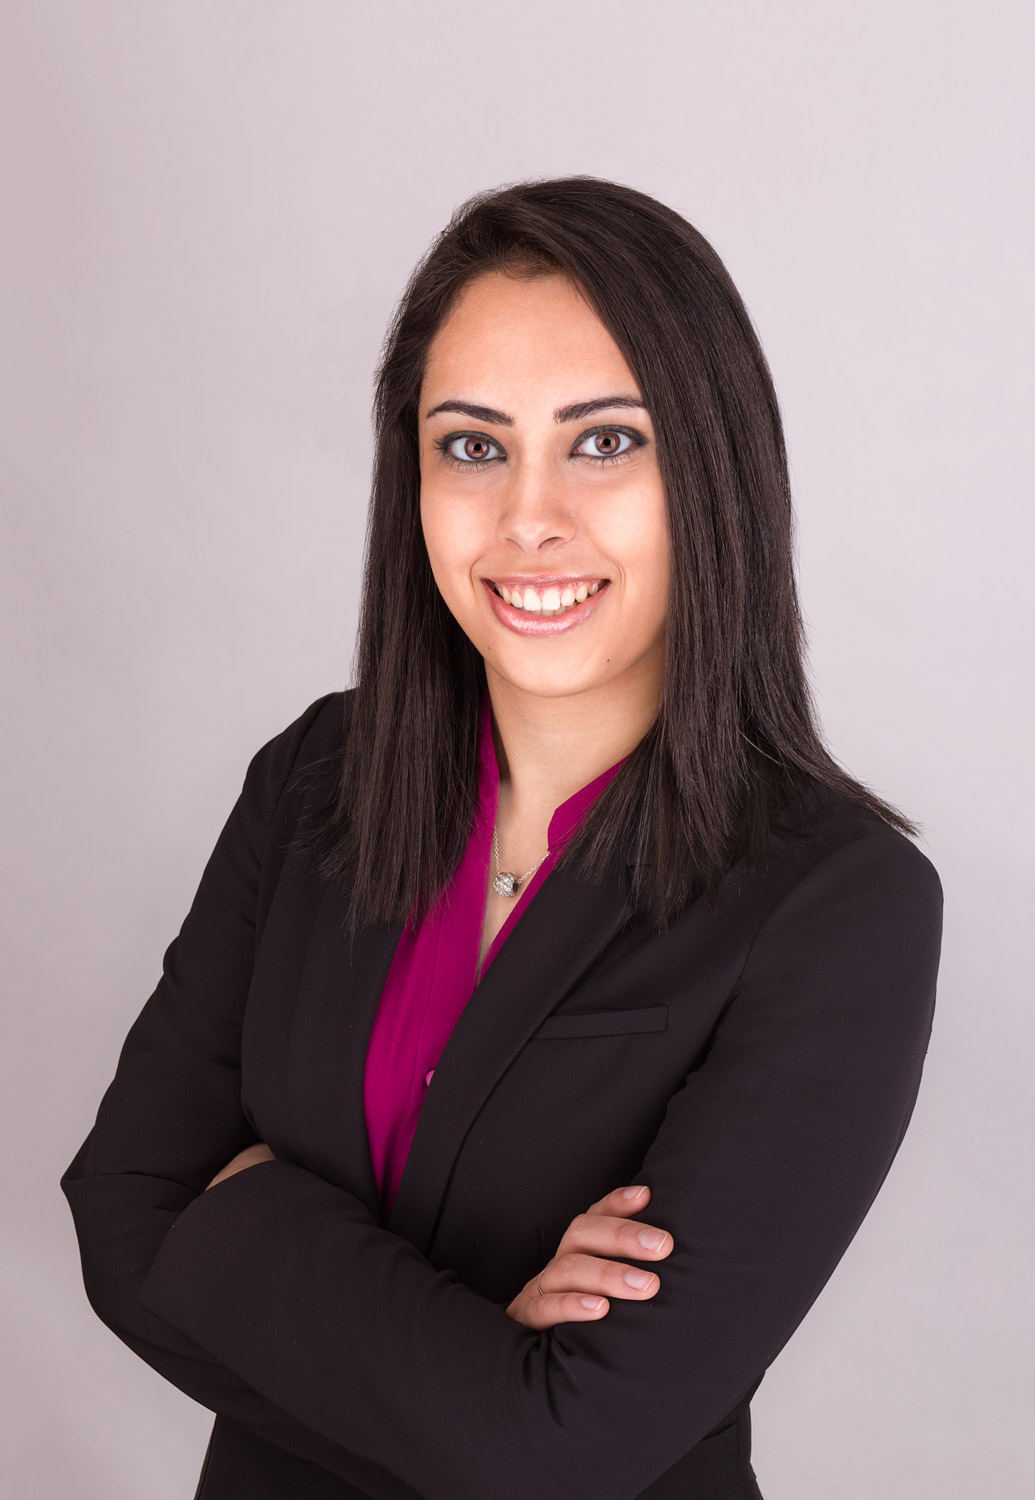 Shafagh stands with her arms crossed against a neutral background. She is smiling. She wears a smart black blazer with a dark pink shirt underneath. She has long straight dark hair and olive skin.